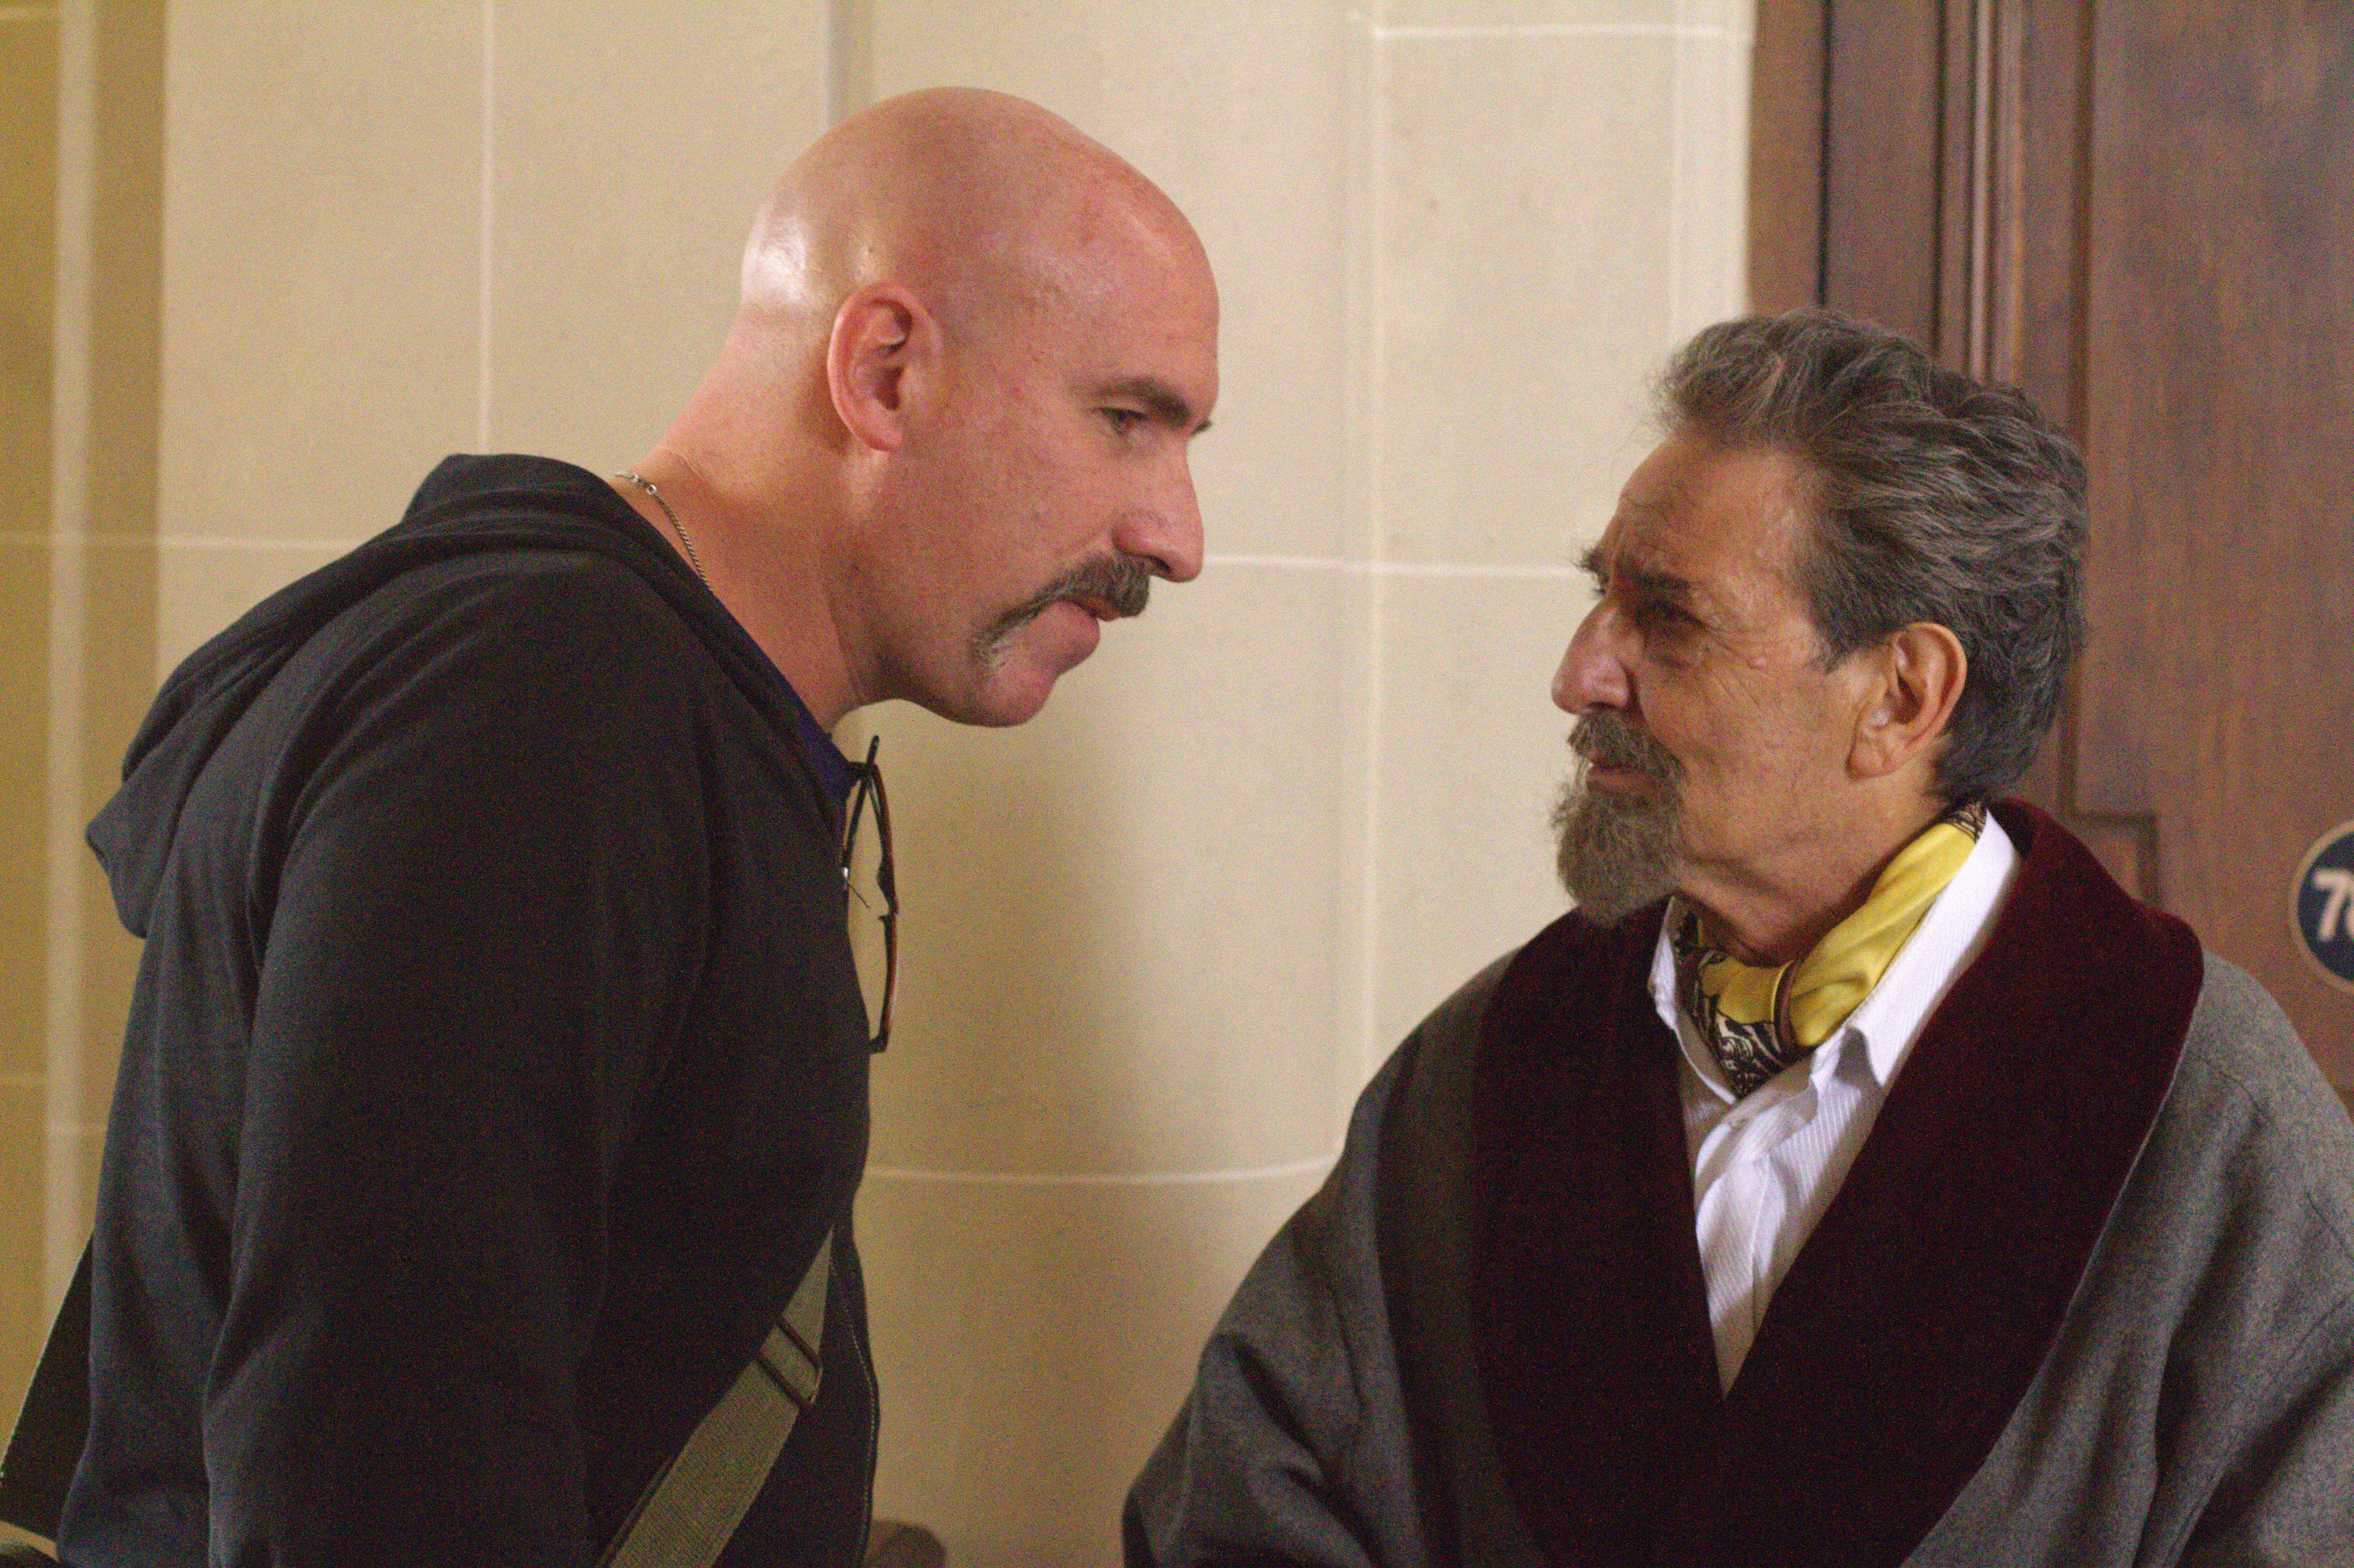 In dialogue with an Actor during Amapola´s shooting.